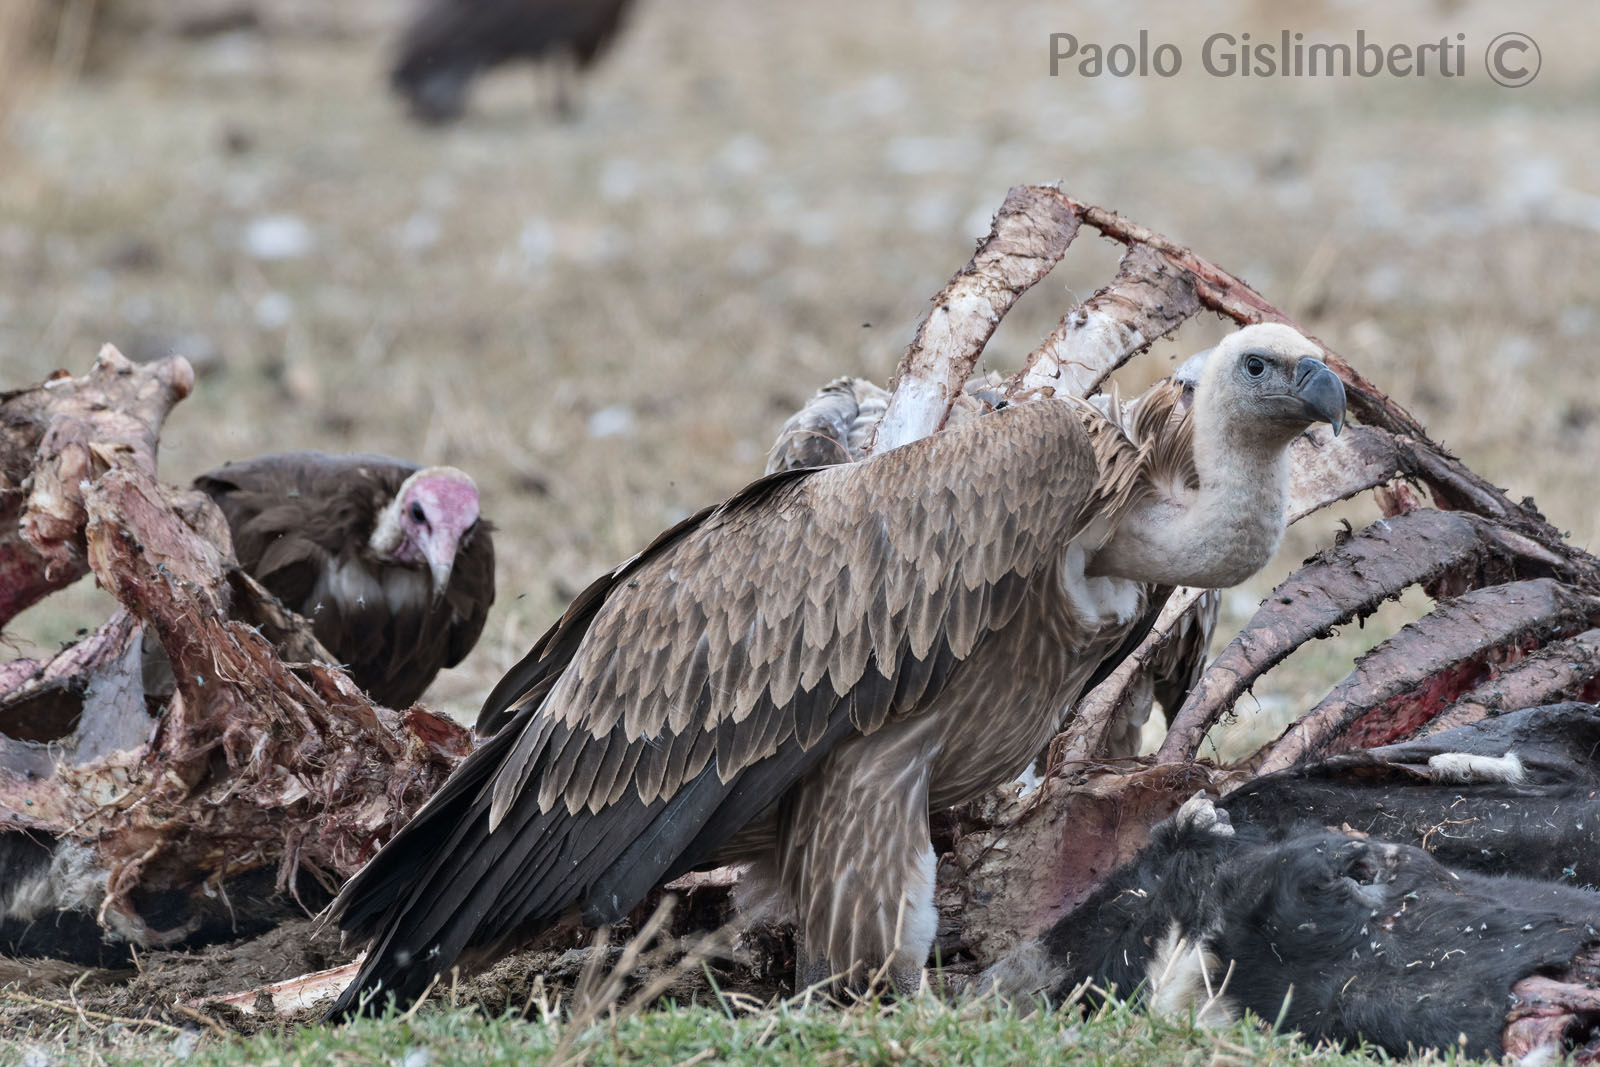 Vultures on the carcass of a cow